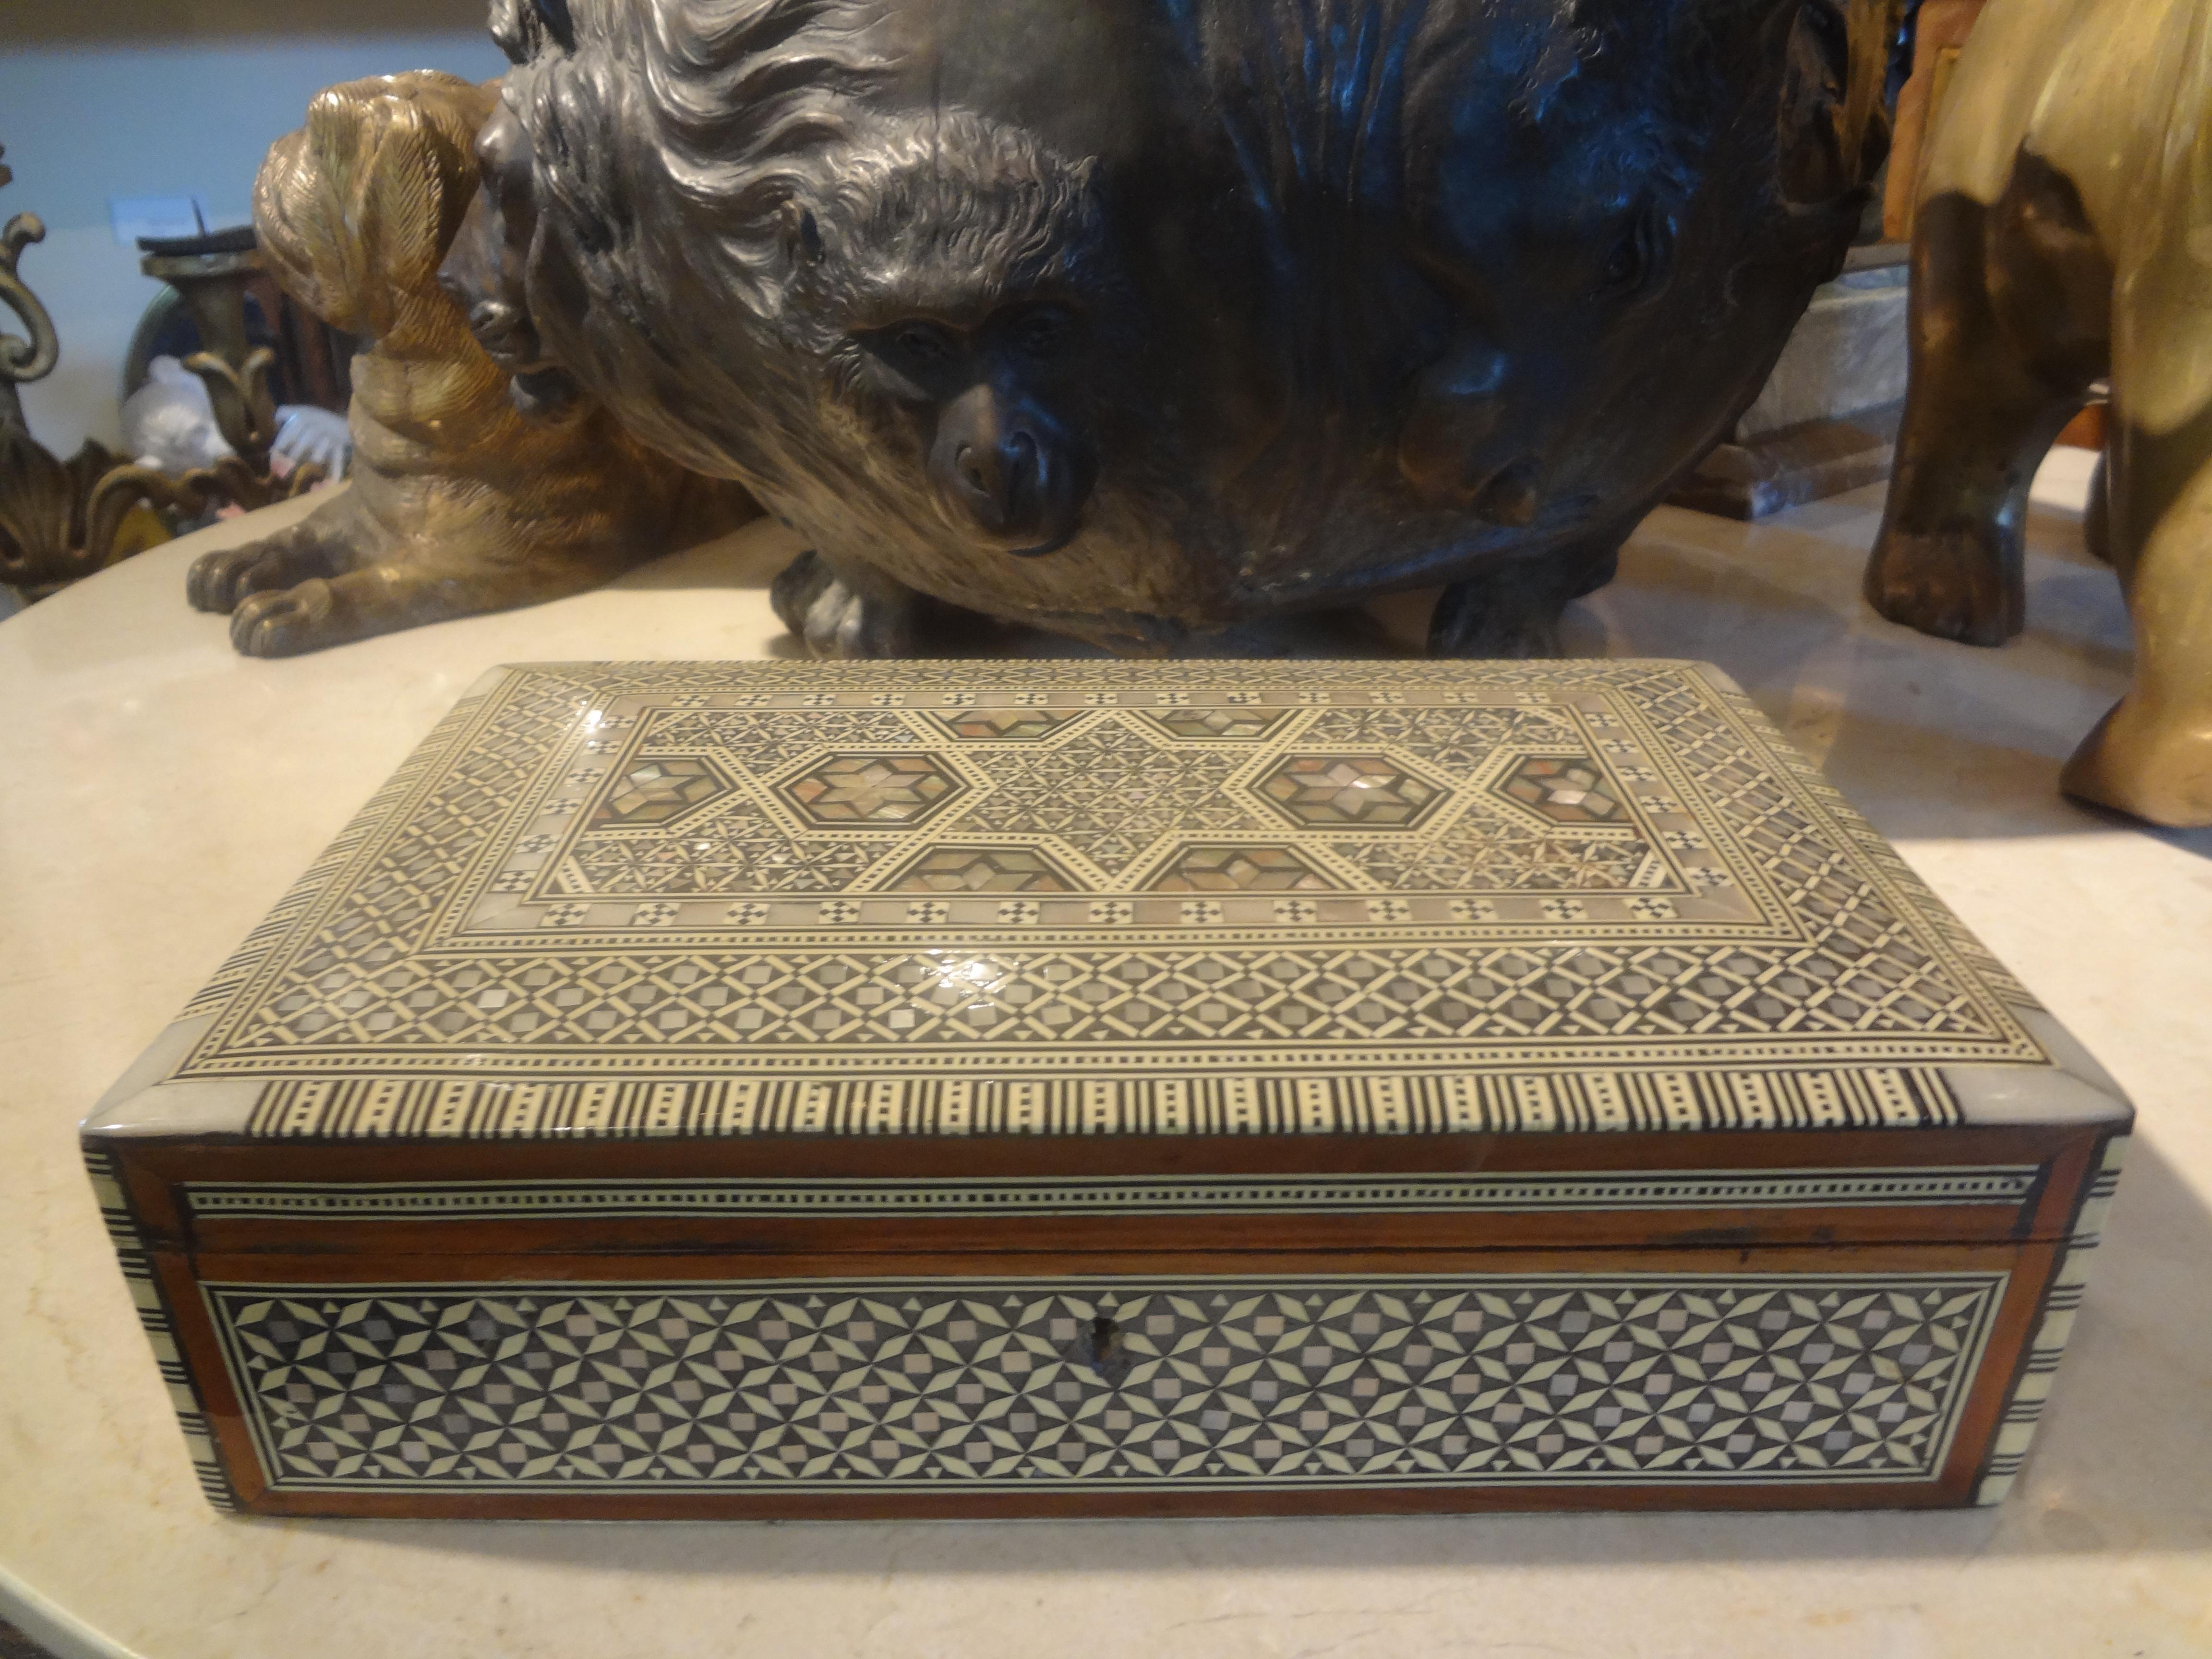 Middle Eastern/Moorish Decorative Box Of Inlaid Woods And Mother-Of-Pearl.
Lovely Arabesque style decorative box or coffee table box with a geometric mosaic pattern of mixed woods and mother-of-pearl. This stunning box has a felt lined interior and